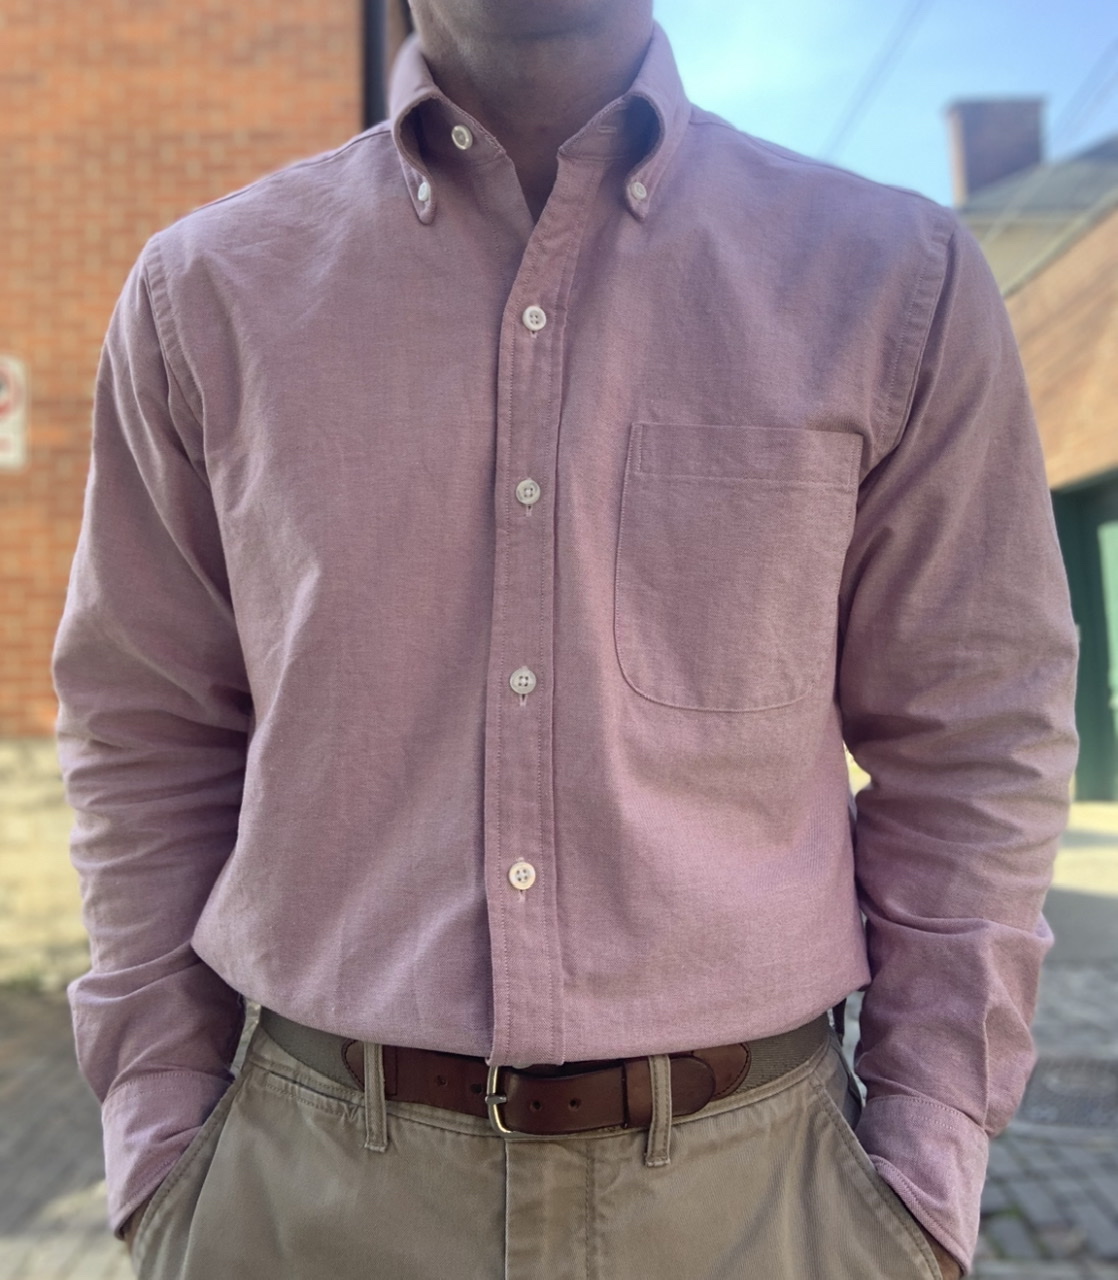 Proper Cloth - The shirt that can handle anything spring weather throws at  it? The oxford. Whether you go for the traditional solid OCBD or a fun  vintage stripe, this hardy year-round